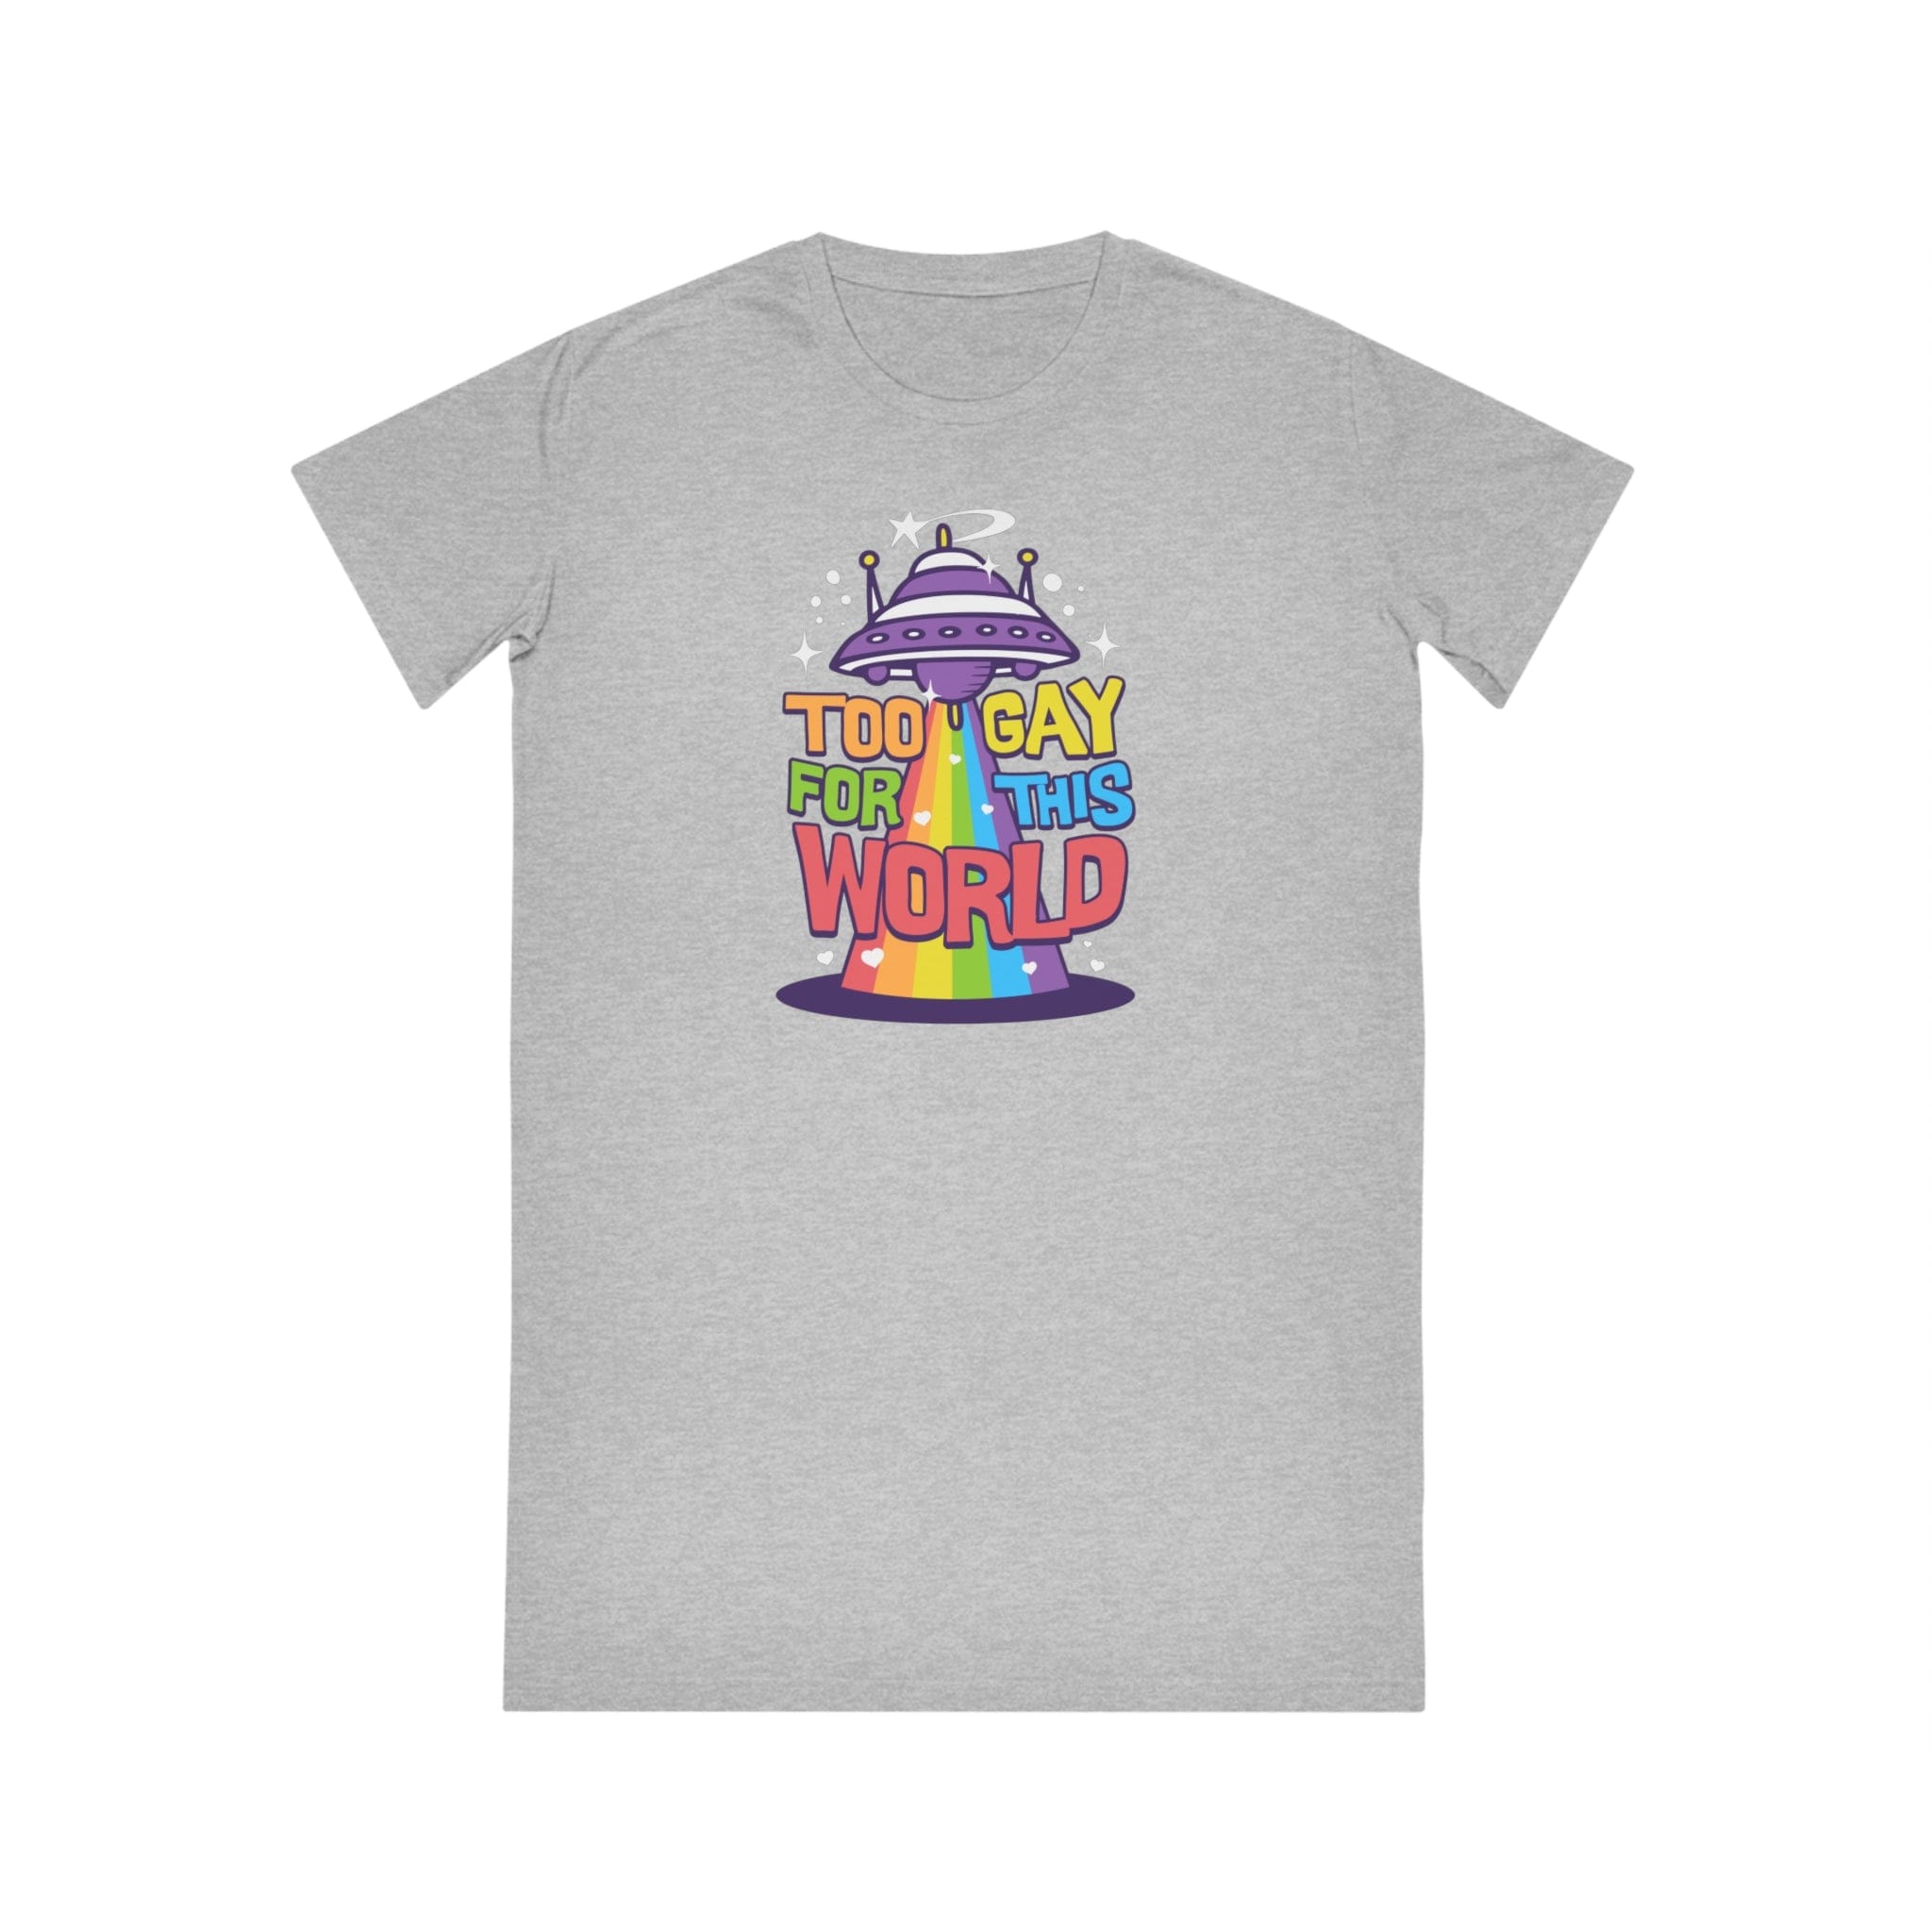 Too Gay for this world - Spinner T-Shirt Dress